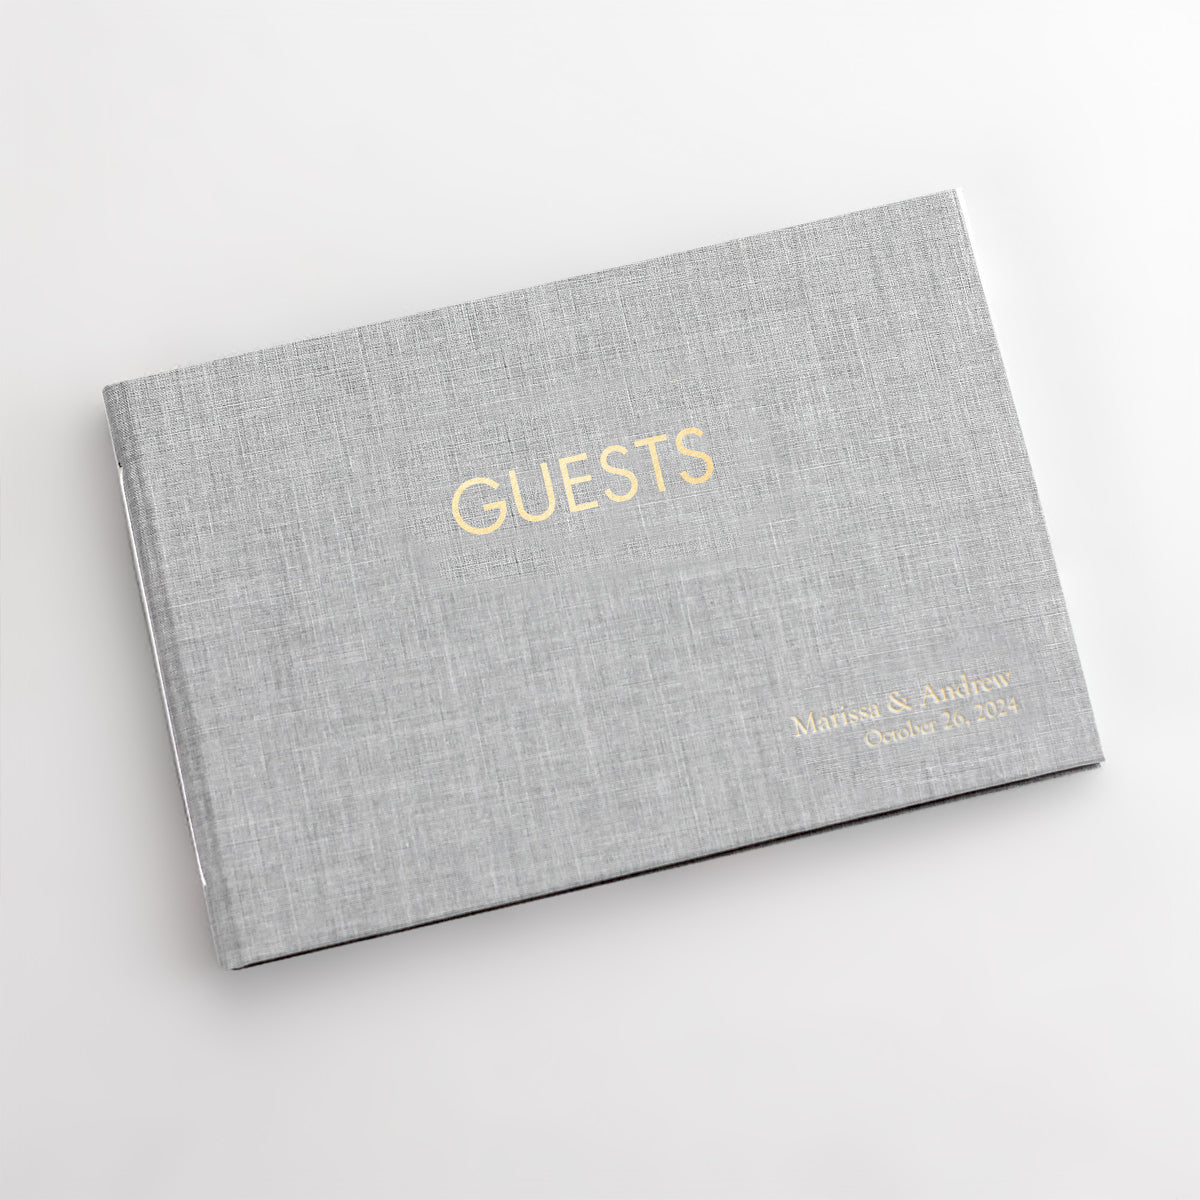 Guestbook Embossed with “Guests” | Cover: Dove Gray Linen | Available Personalized